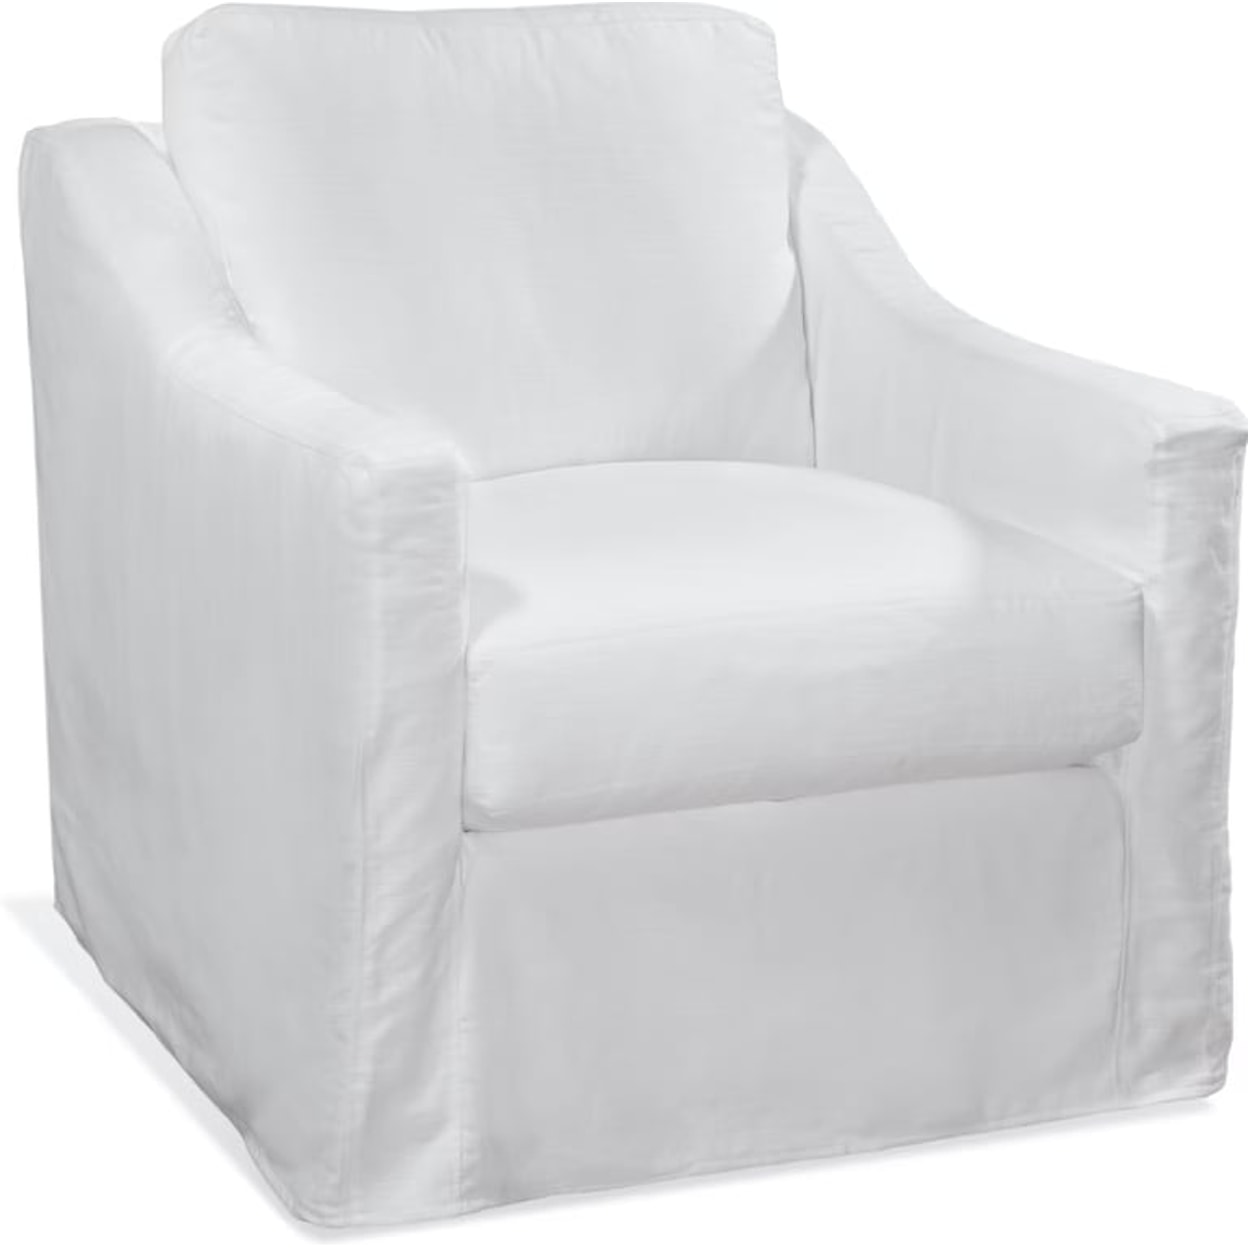 Braxton Culler Oliver Chair with Slipcover